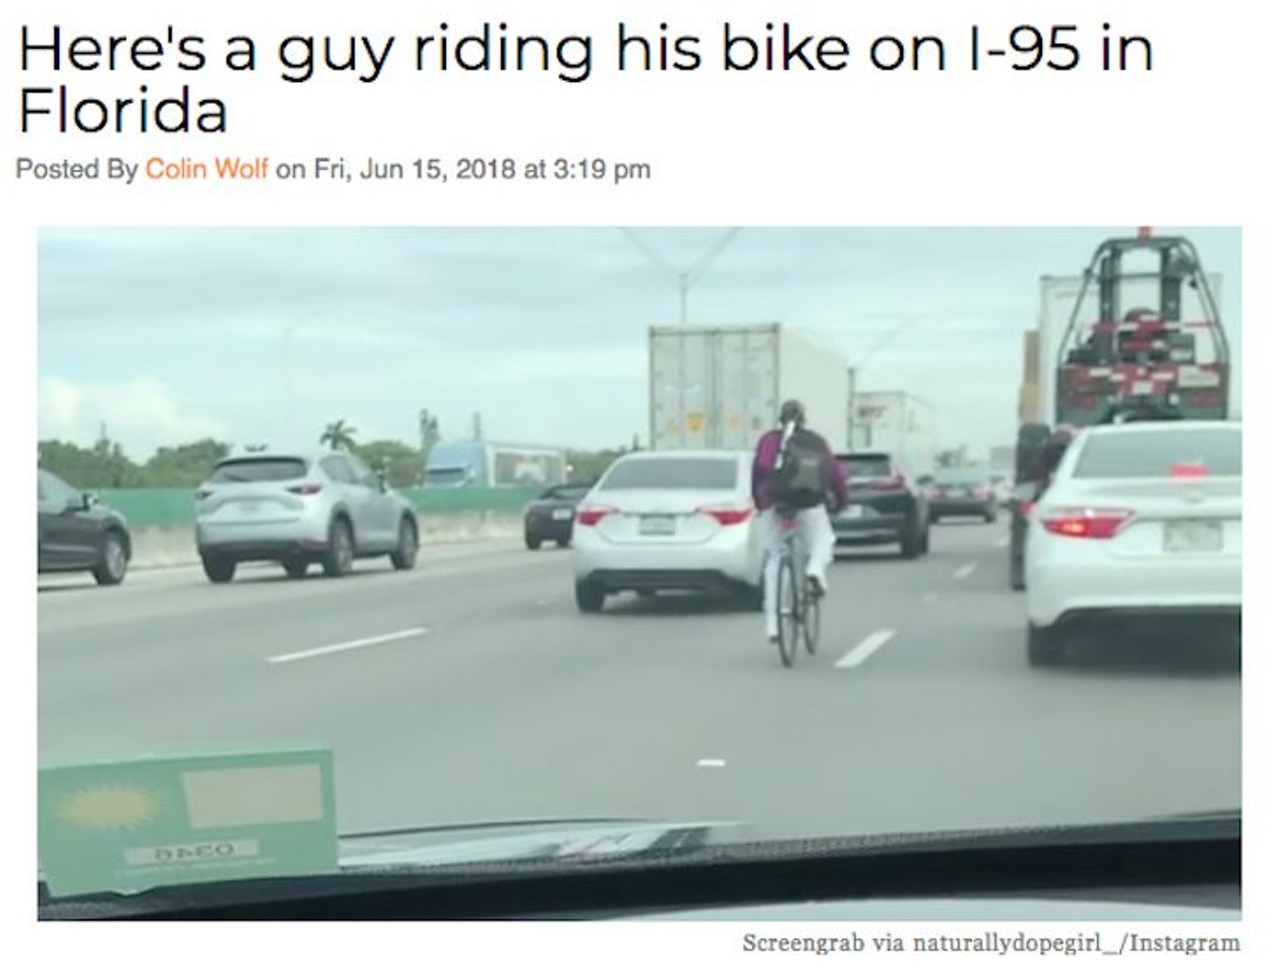 Considering Florida ranked second in the nation last year in bicycle and pedestrian deaths, it shouldn't be much of a surprise at this point to see a guy riding his bike down a busy highway. Read more here.